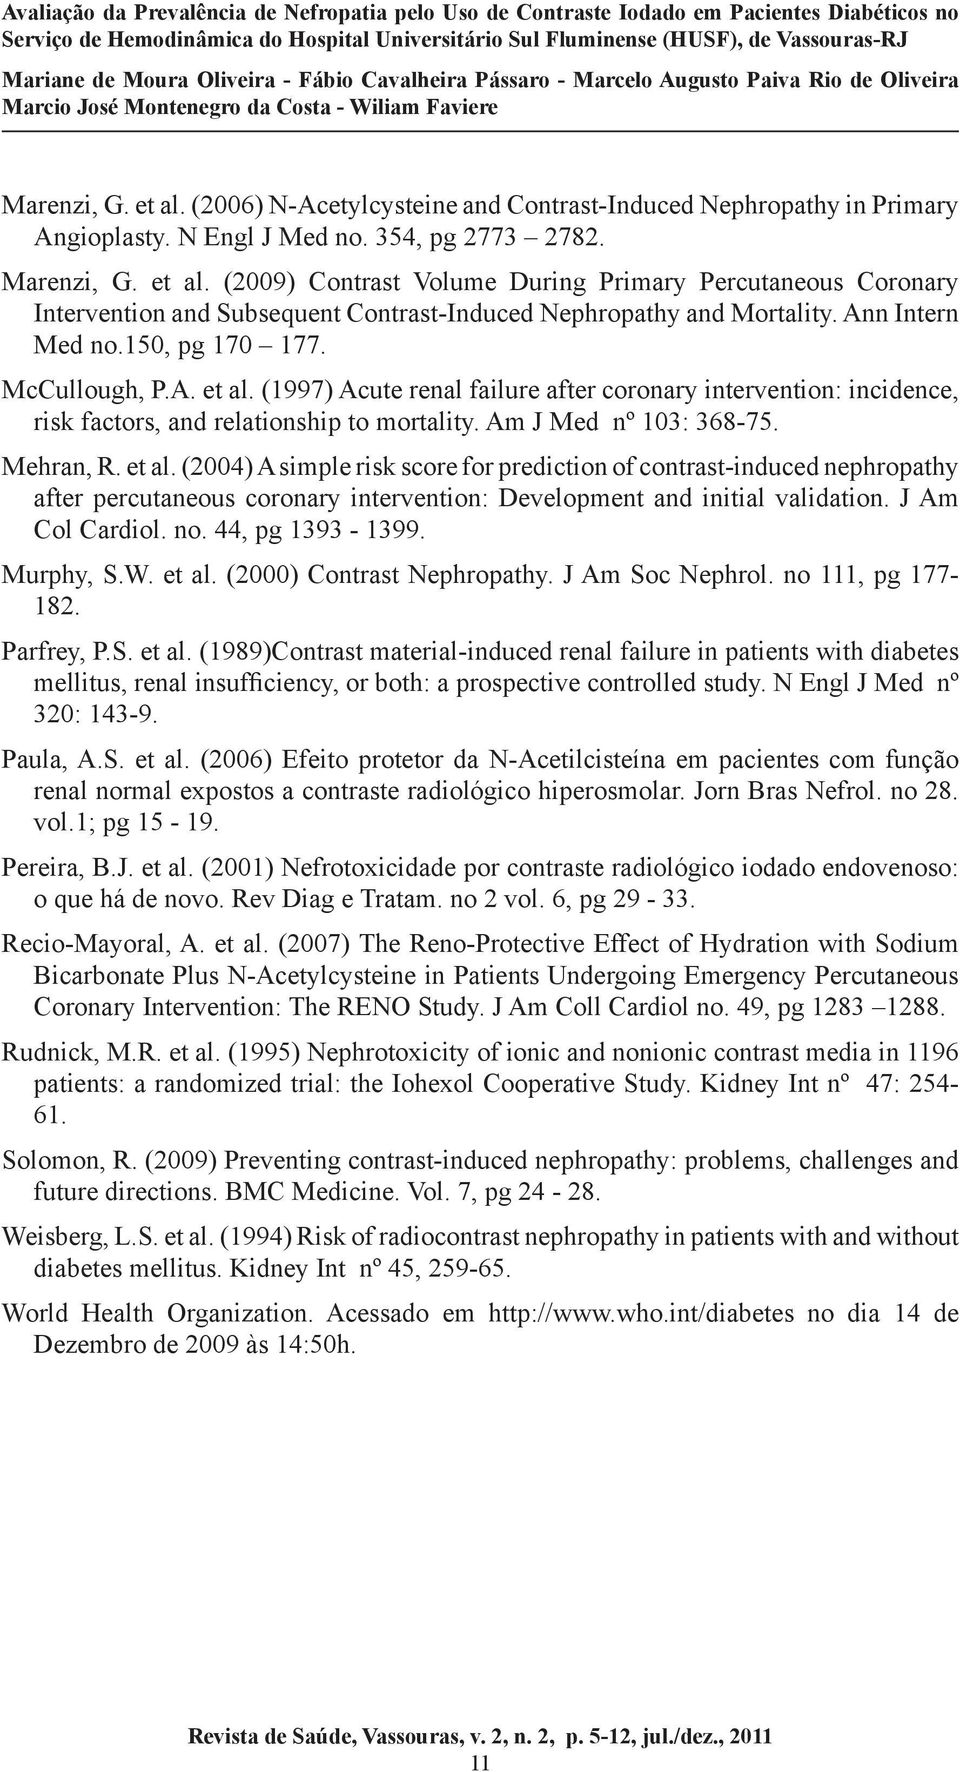 Mehran, R. et al. (2004) A simple risk score for prediction of contrast-induced nephropathy after percutaneous coronary intervention: Development and initial validation. J Am Col Cardiol. no.